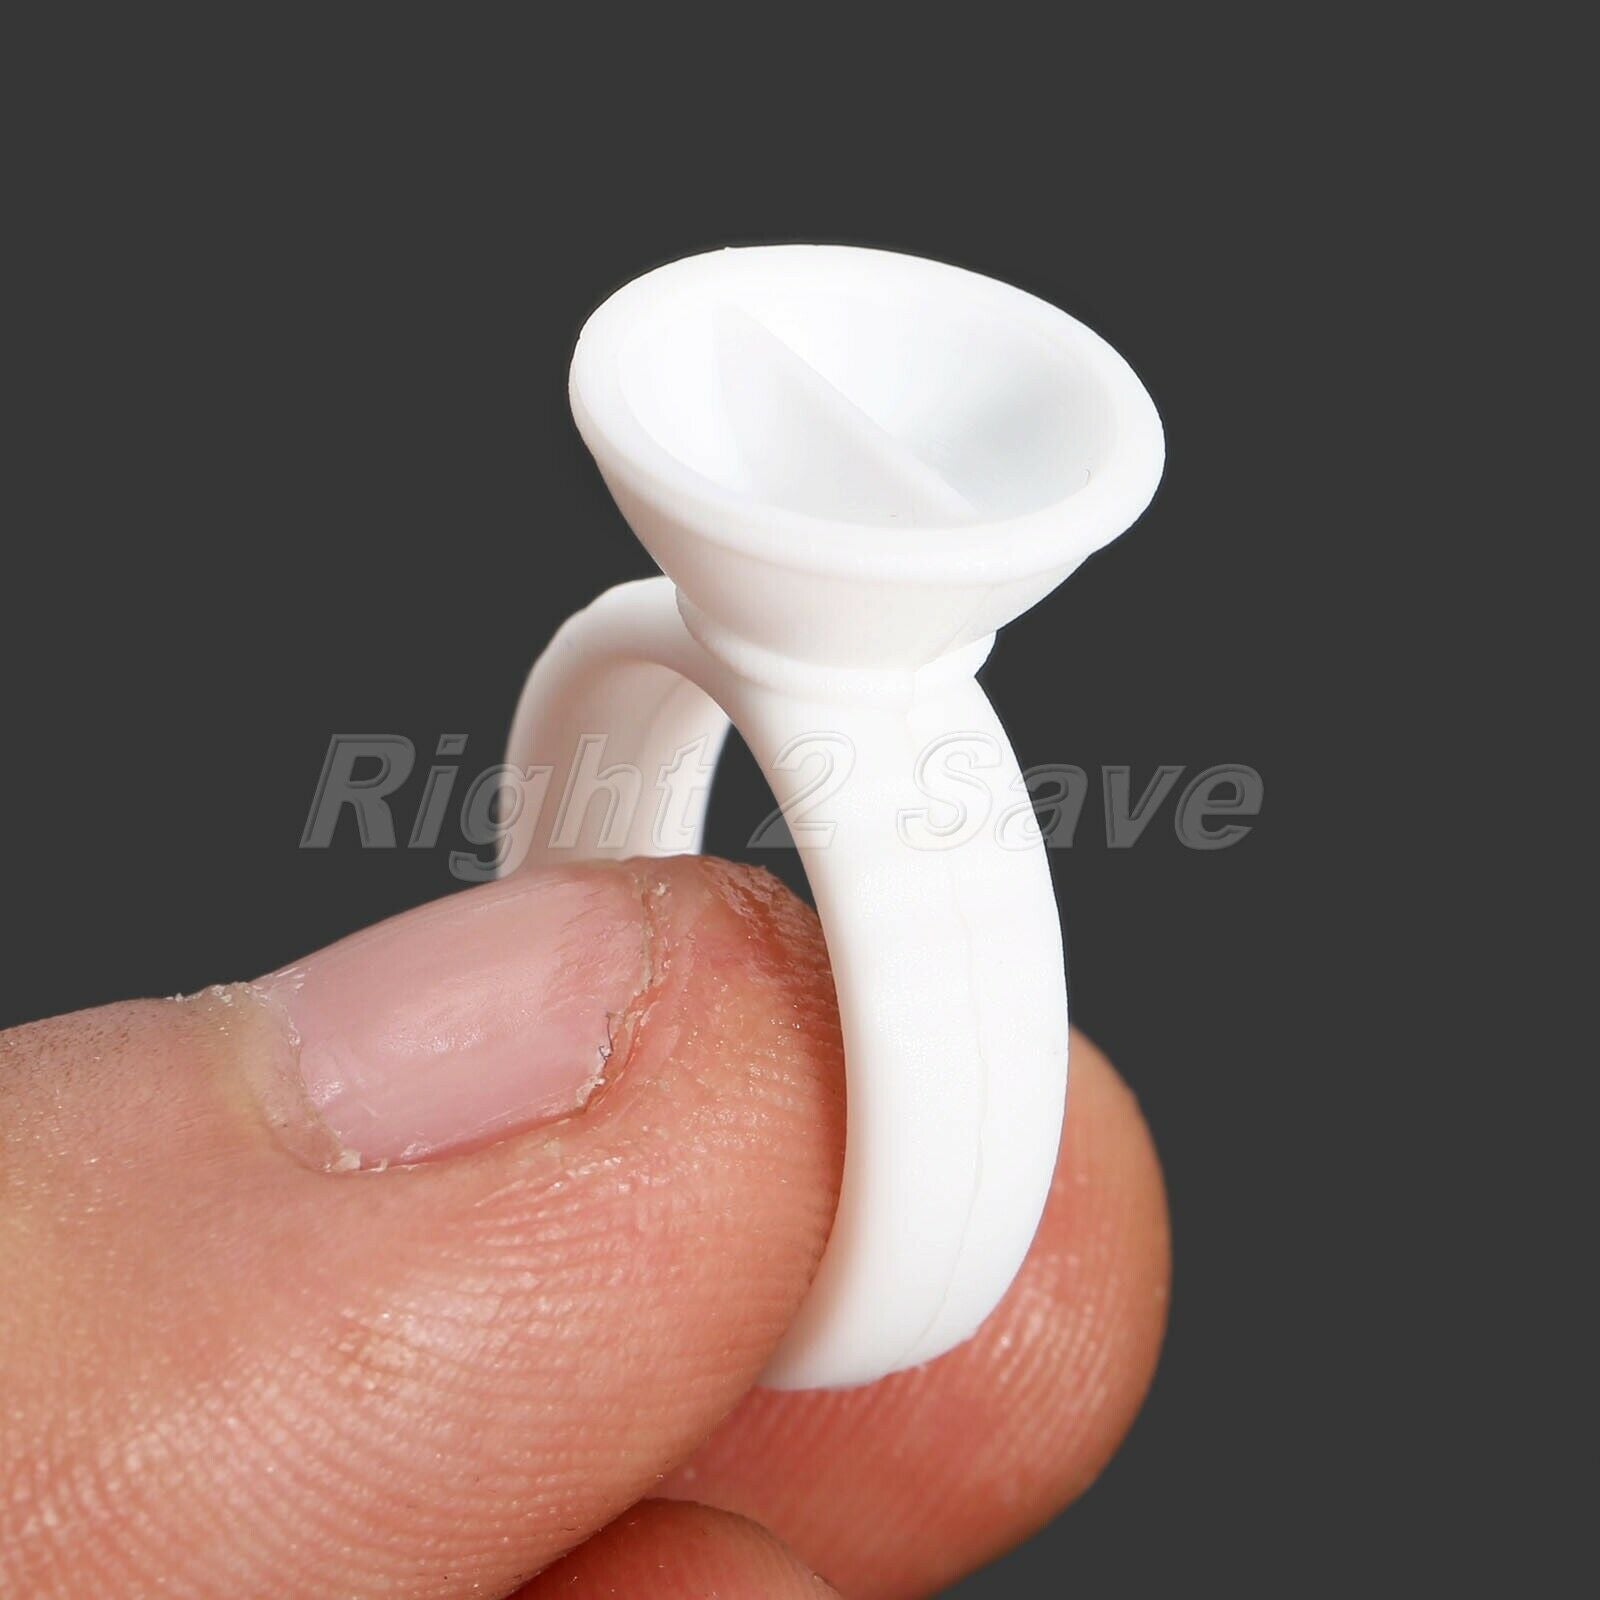 50Pcs Plastic Tattoo Ink Holder Rings For Eyebrow Lips Permanent Makeup Pigment